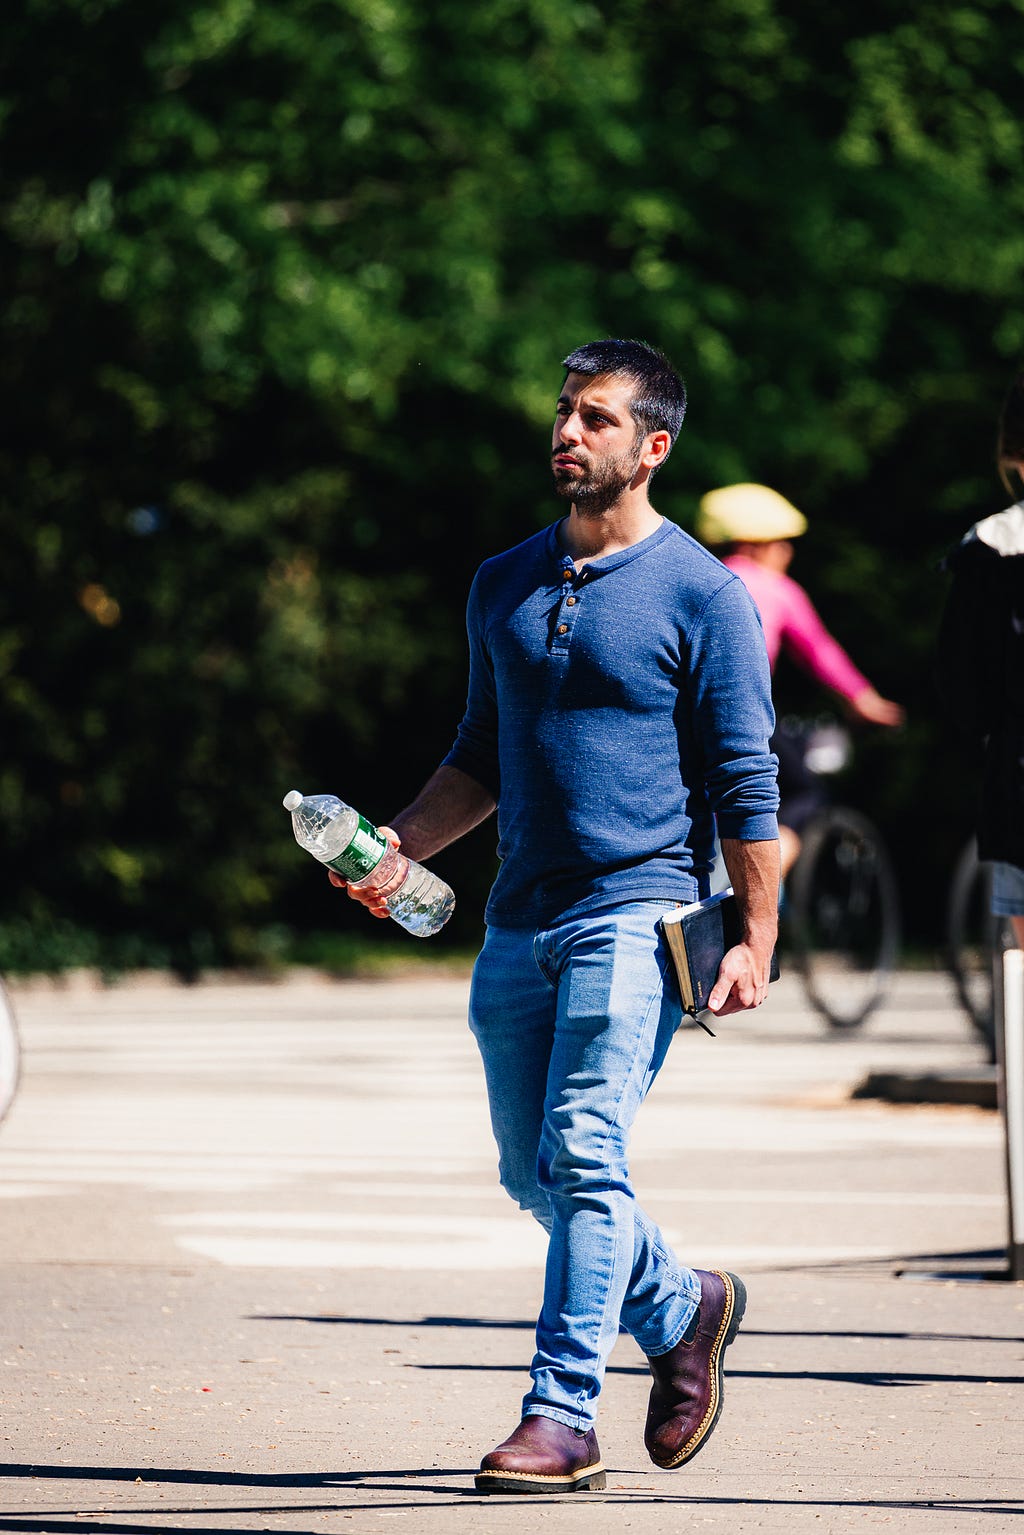 Man in jeans with a water bottle walking in front of green trees